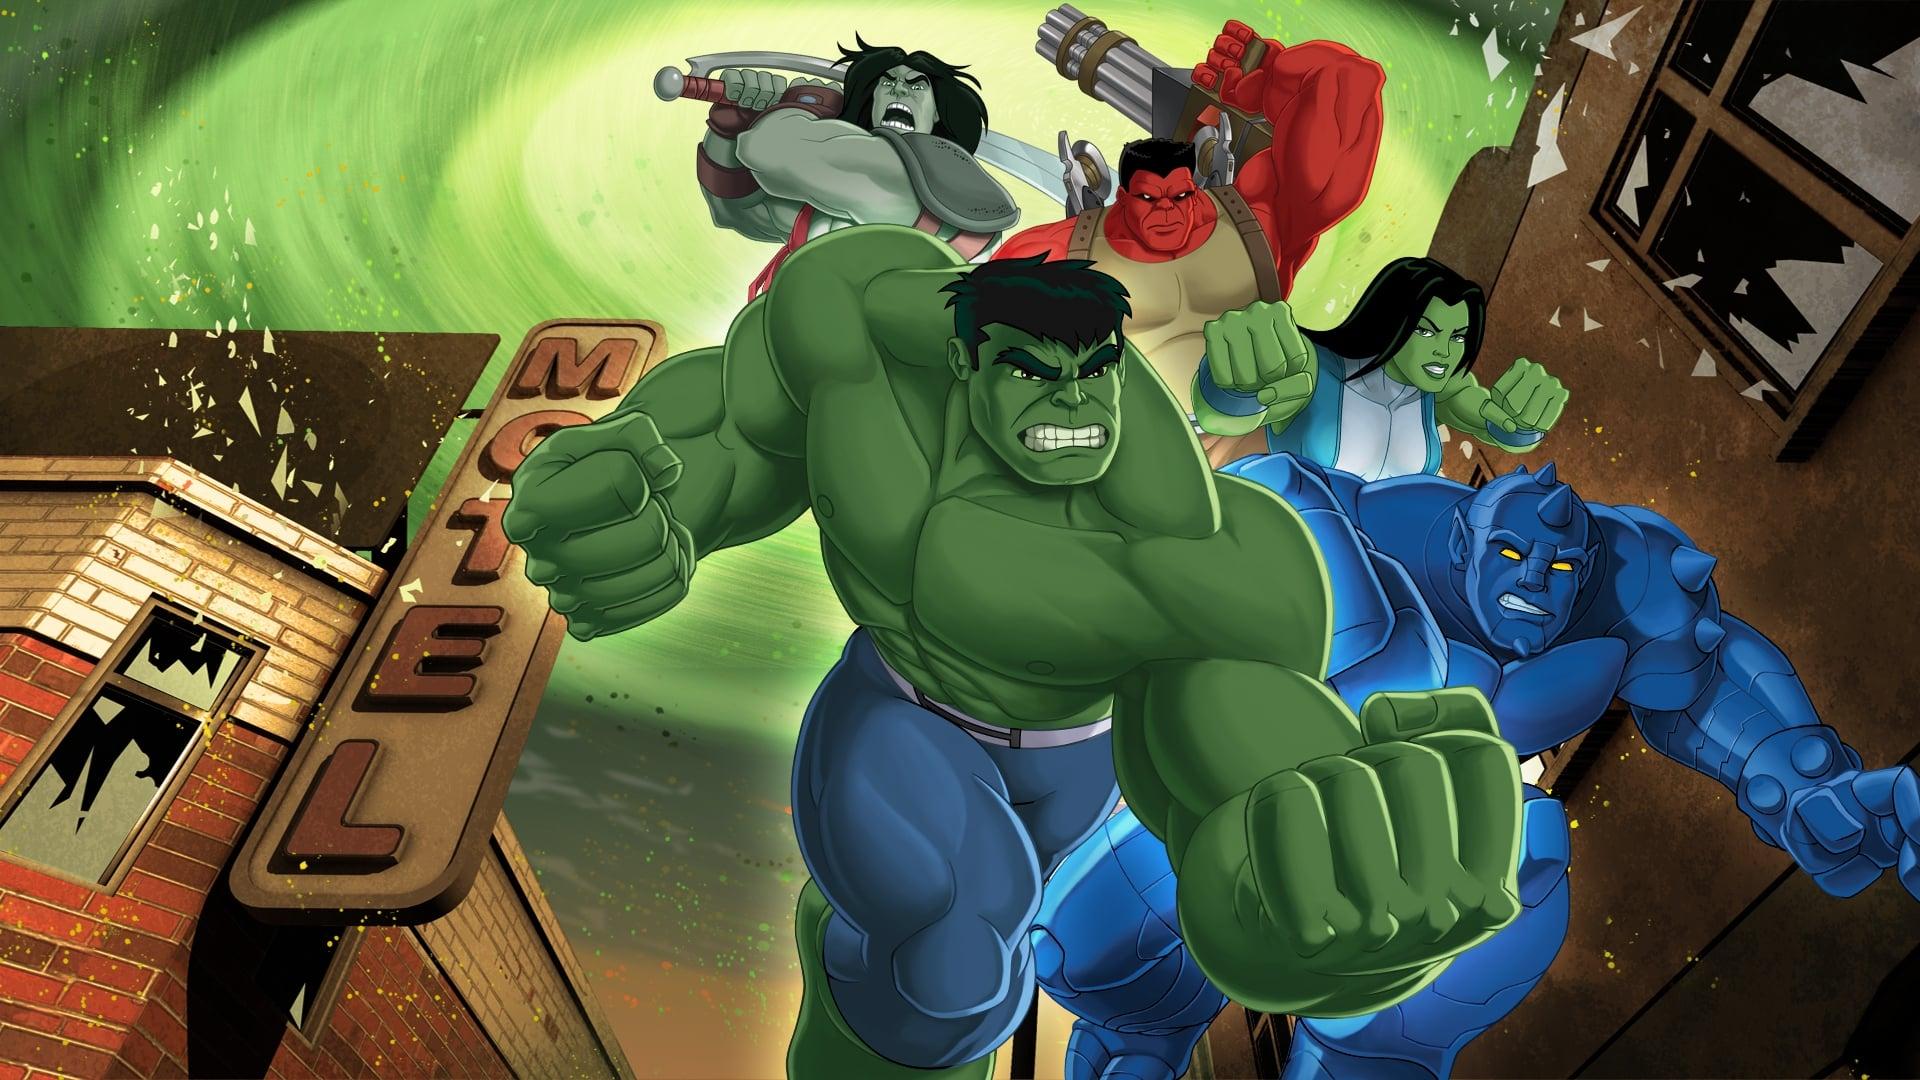 Marvel's Hulk and the Agents of S.M.A.S.H. backdrop